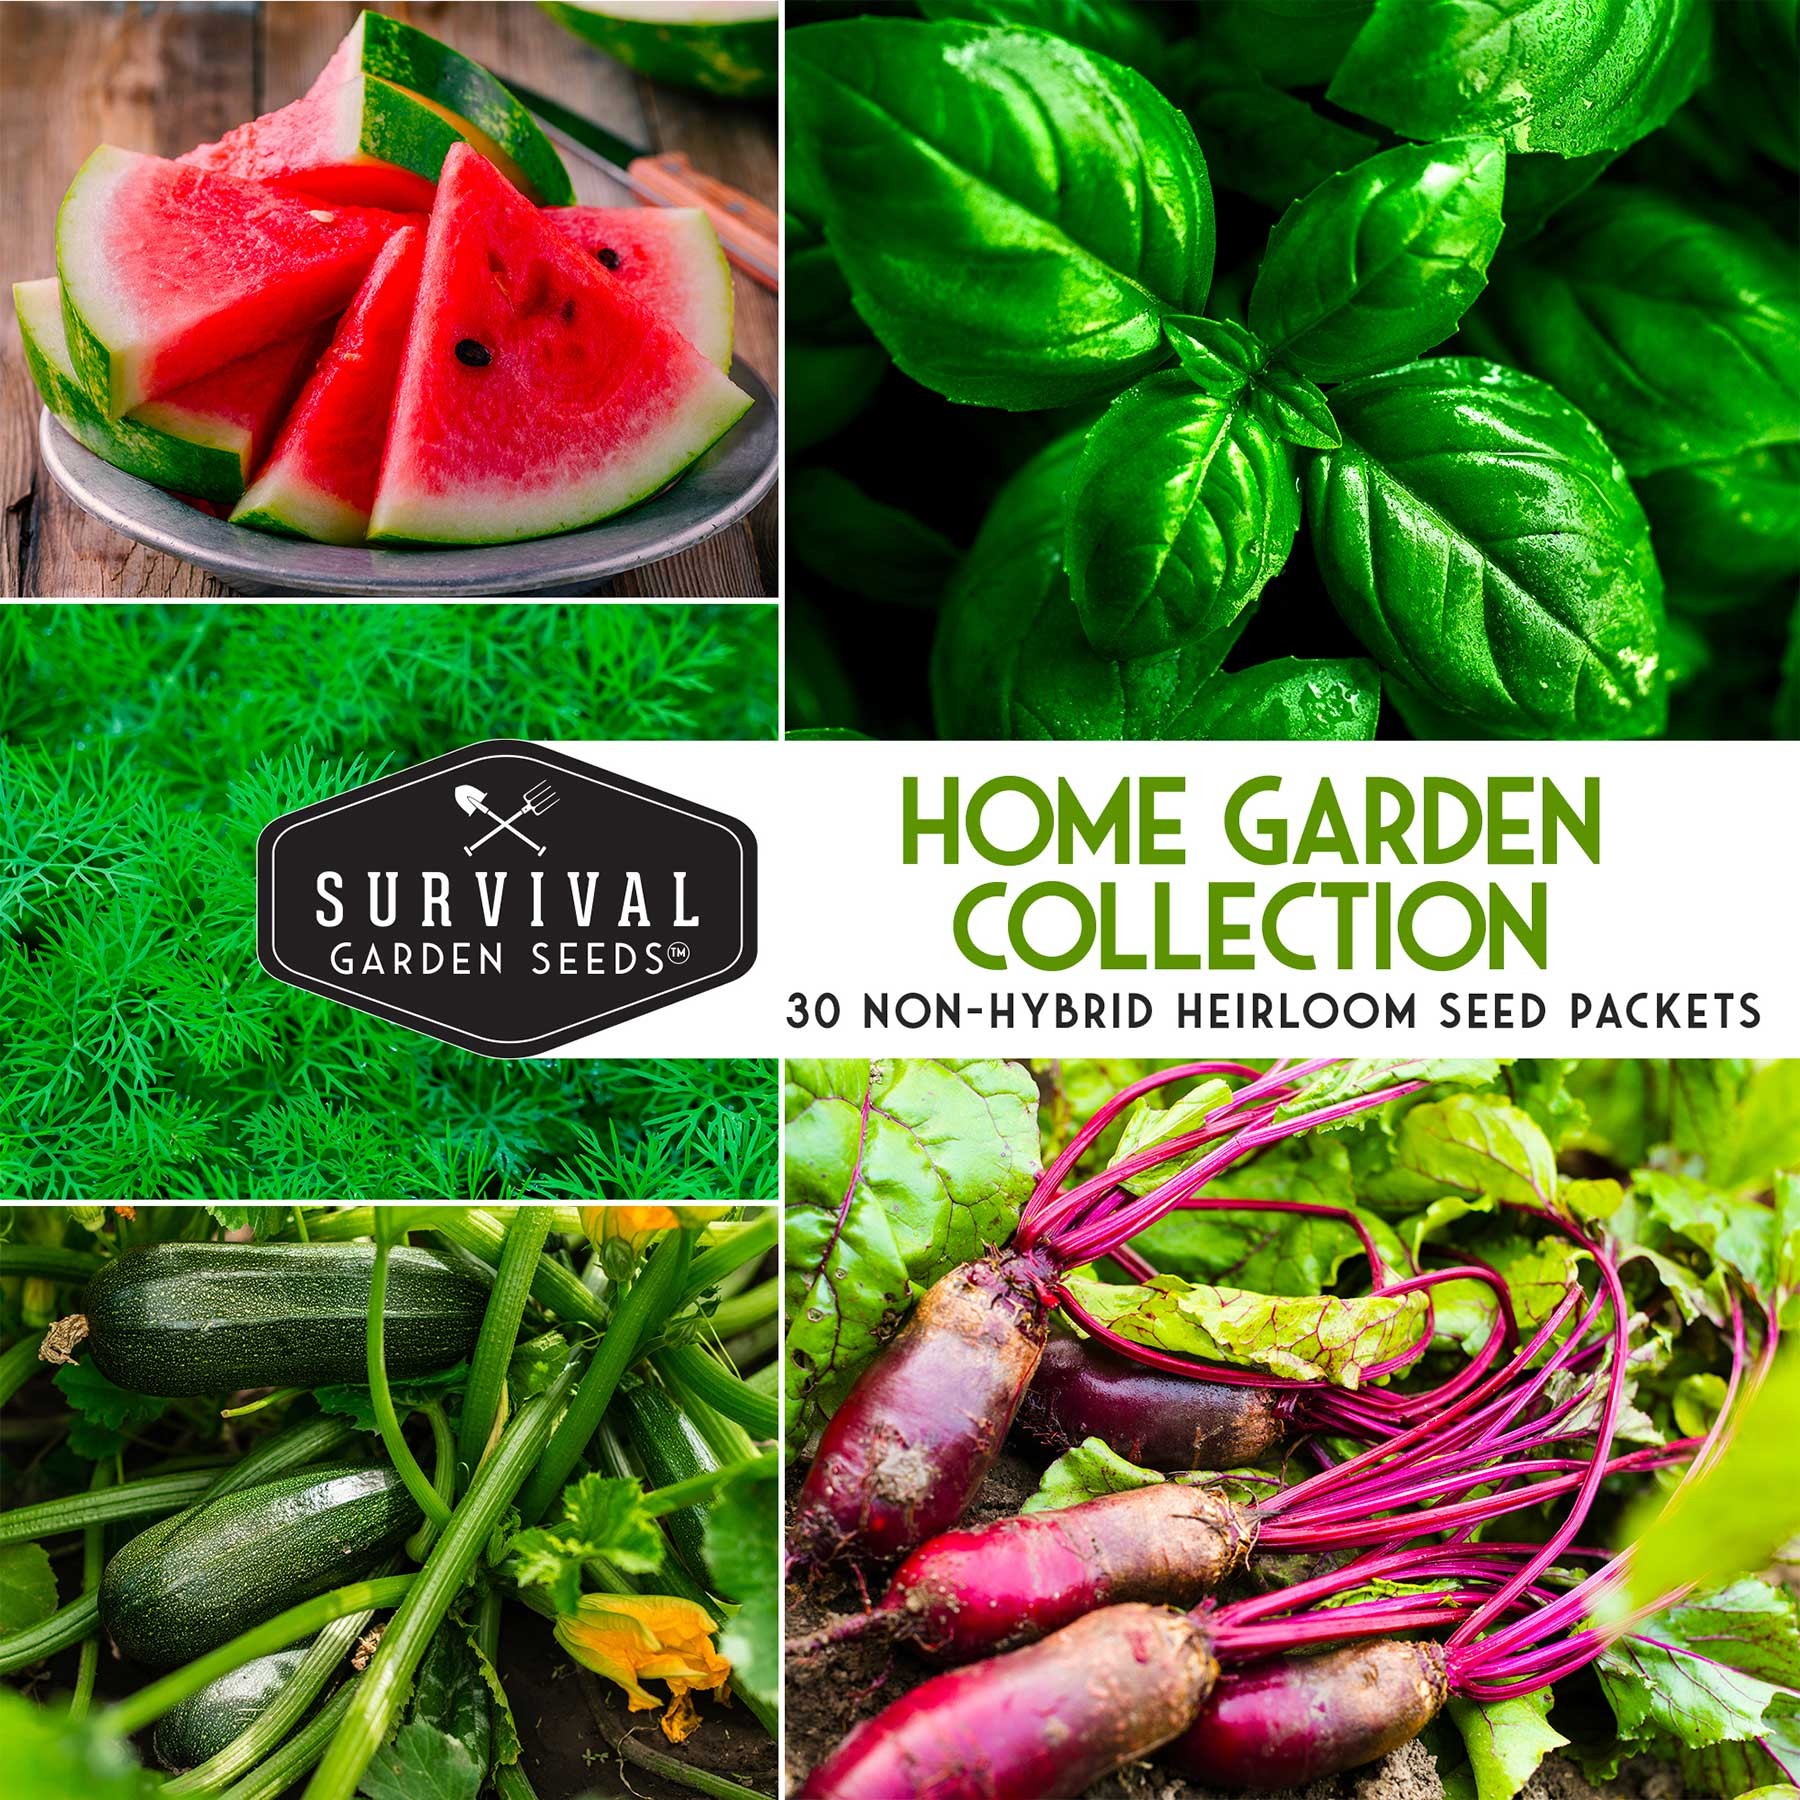 Home Garden Collection - 30 Non-Hybrid Heirloom seed packets